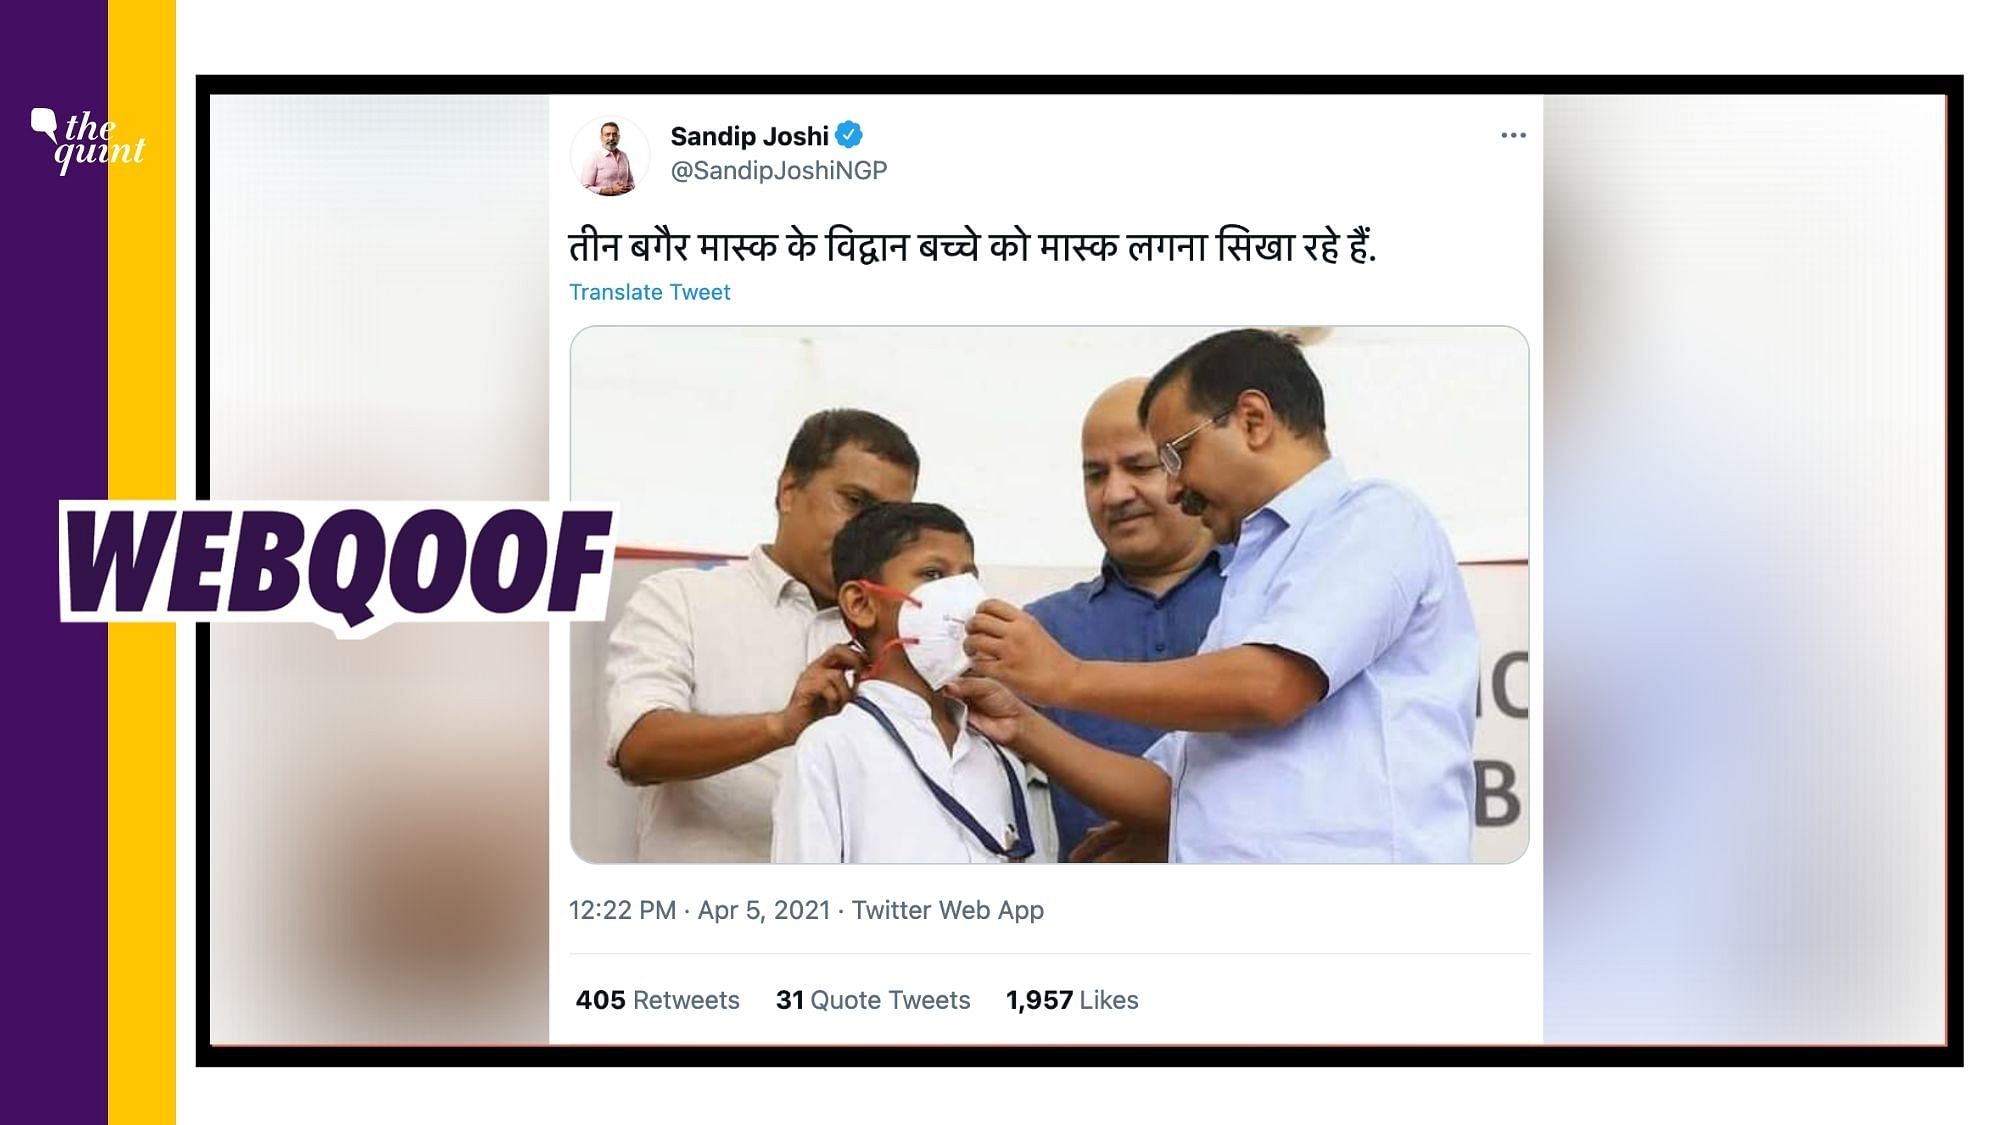 The image is from November 2019 when Kejriwal along with Manish Sisodia distribute masks to school children.